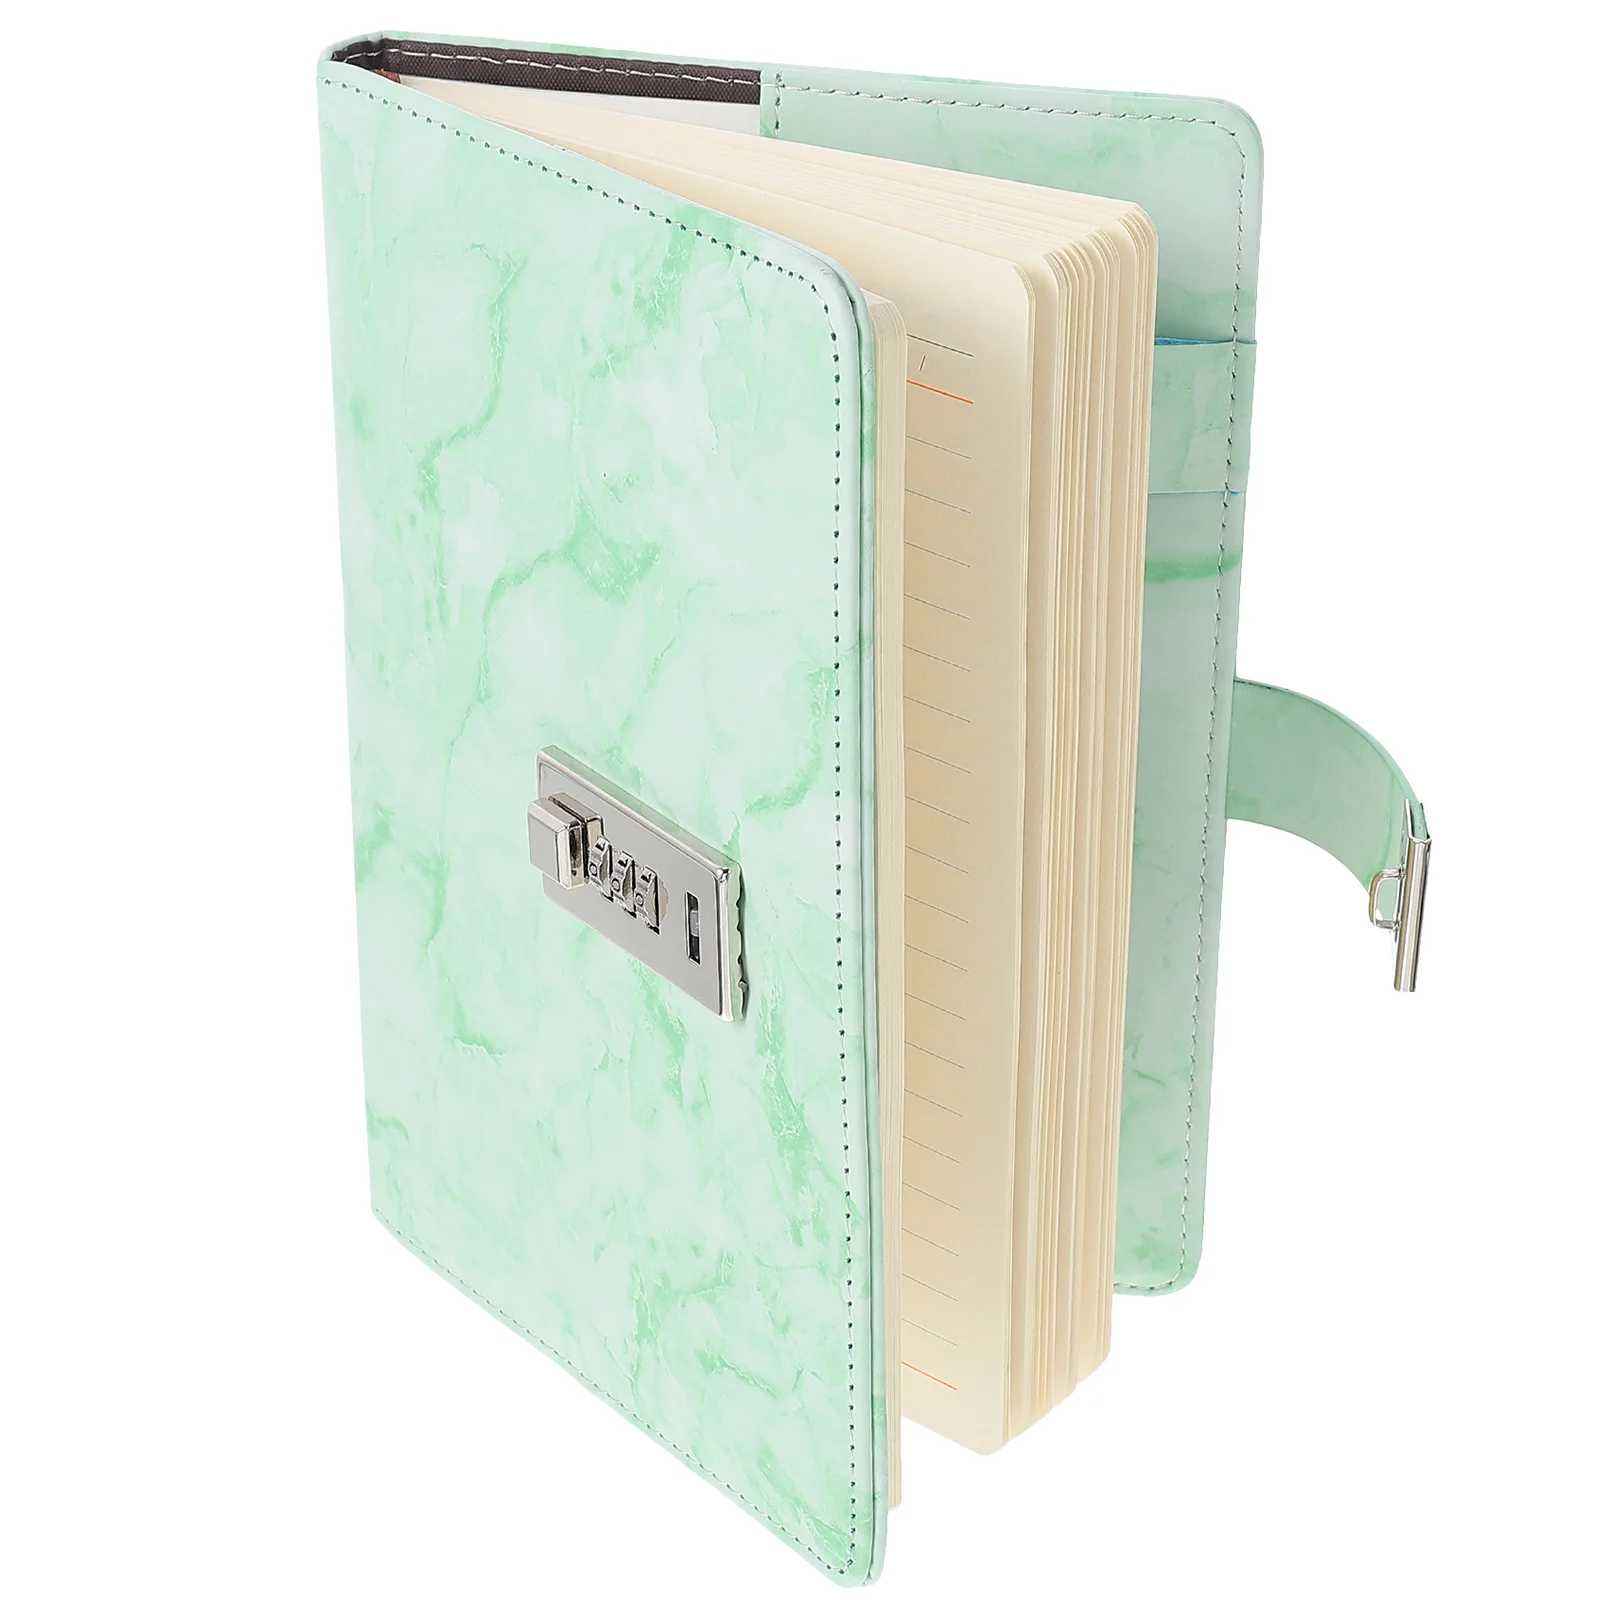 

Password Notebook Pocket Journal Diary Accessories Delicate Household Lock Paper Record Supply Travel Write Secret for Personal